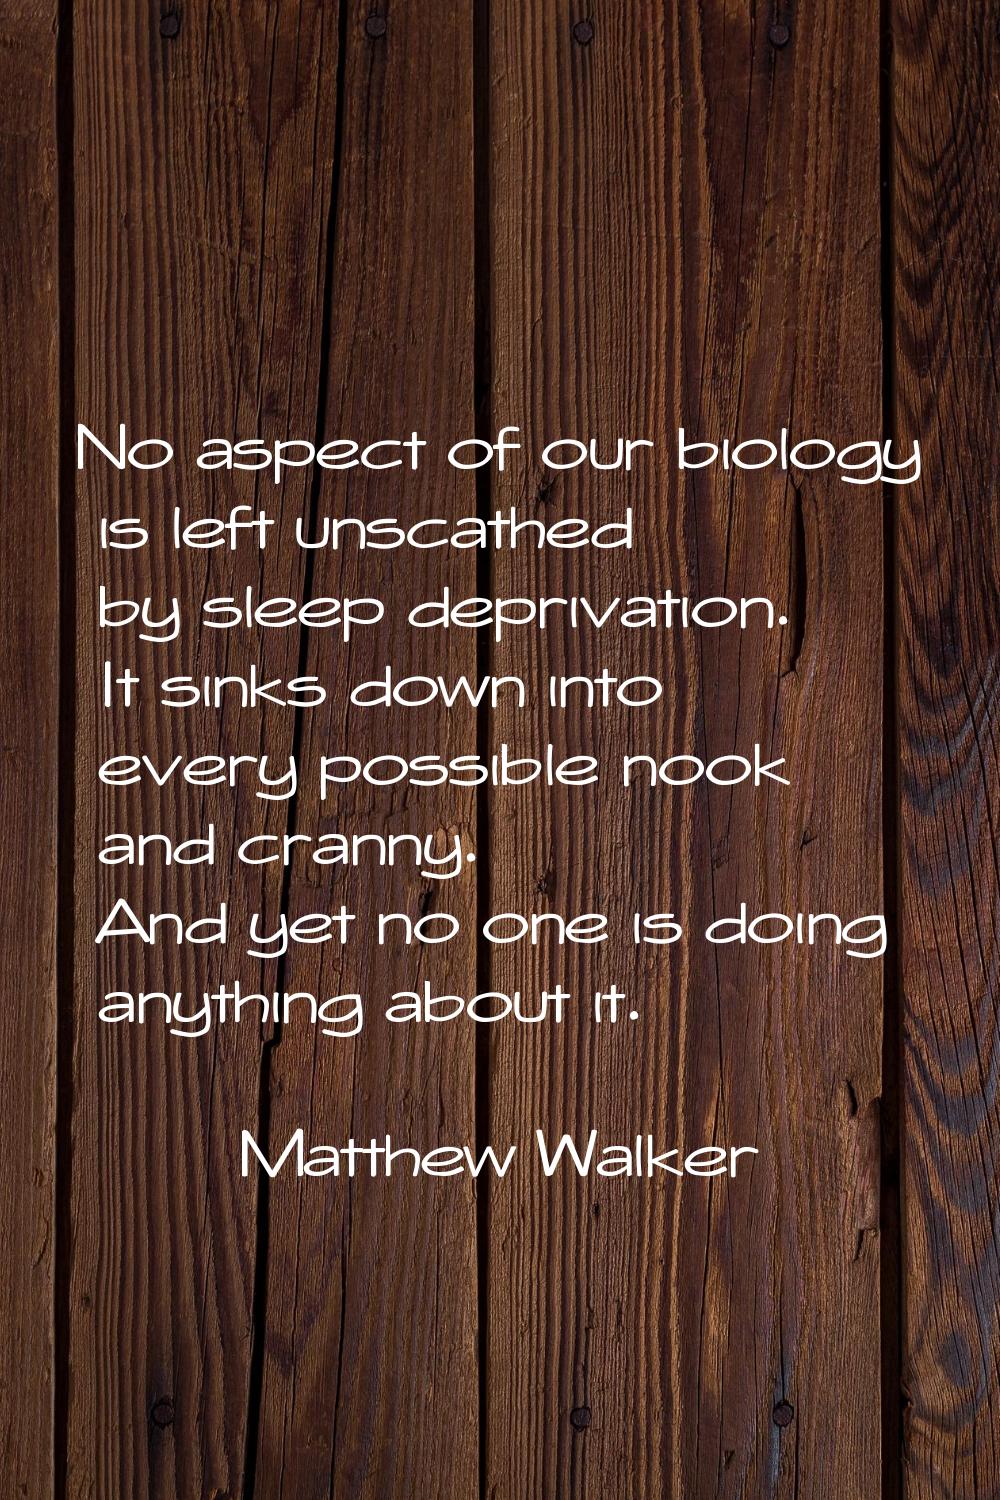 No aspect of our biology is left unscathed by sleep deprivation. It sinks down into every possible 